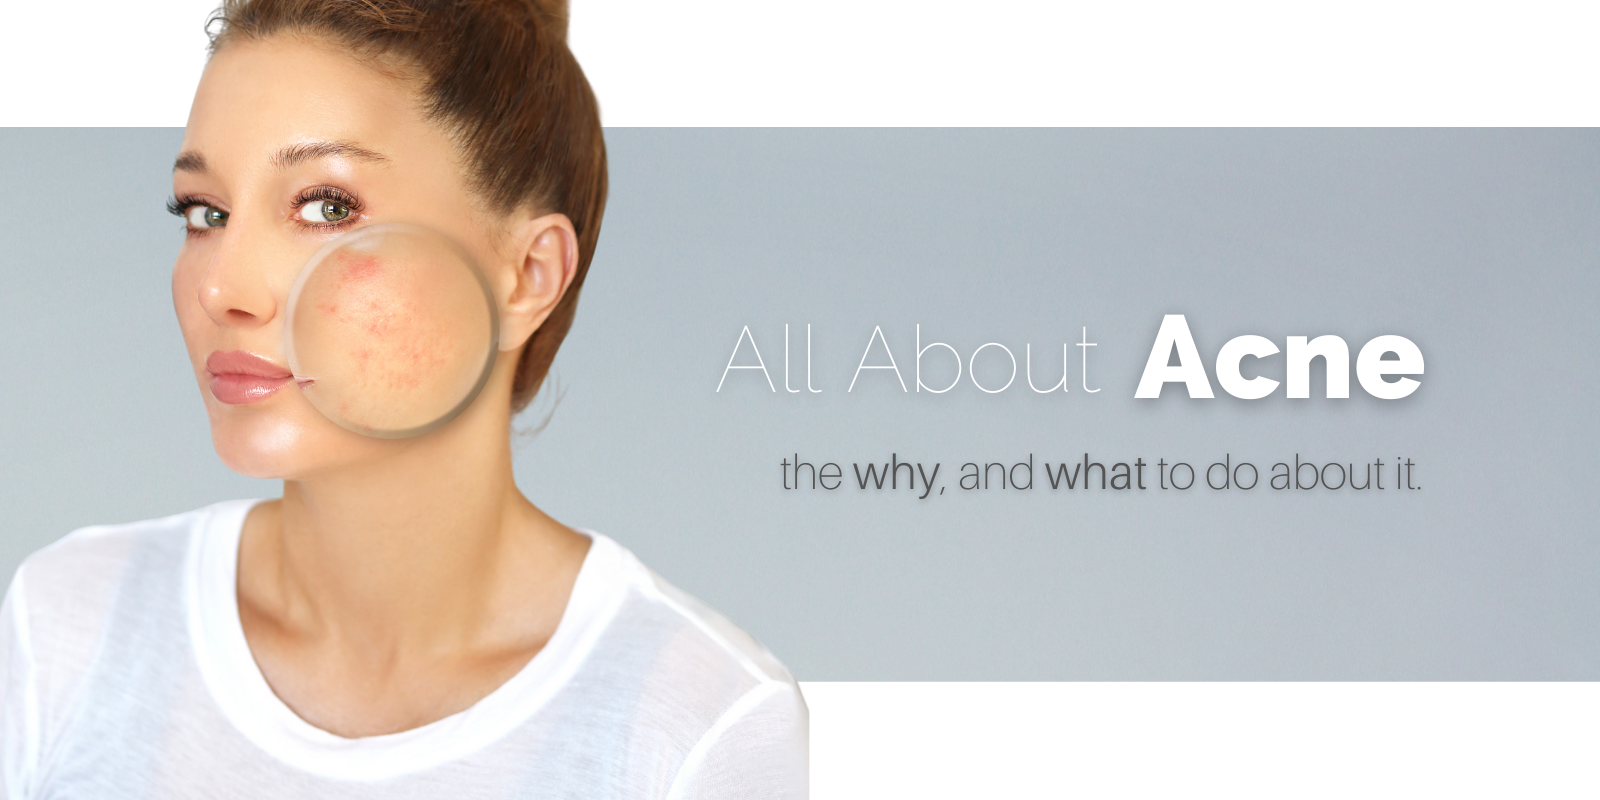 acne causes and acne treatments Victoria BC